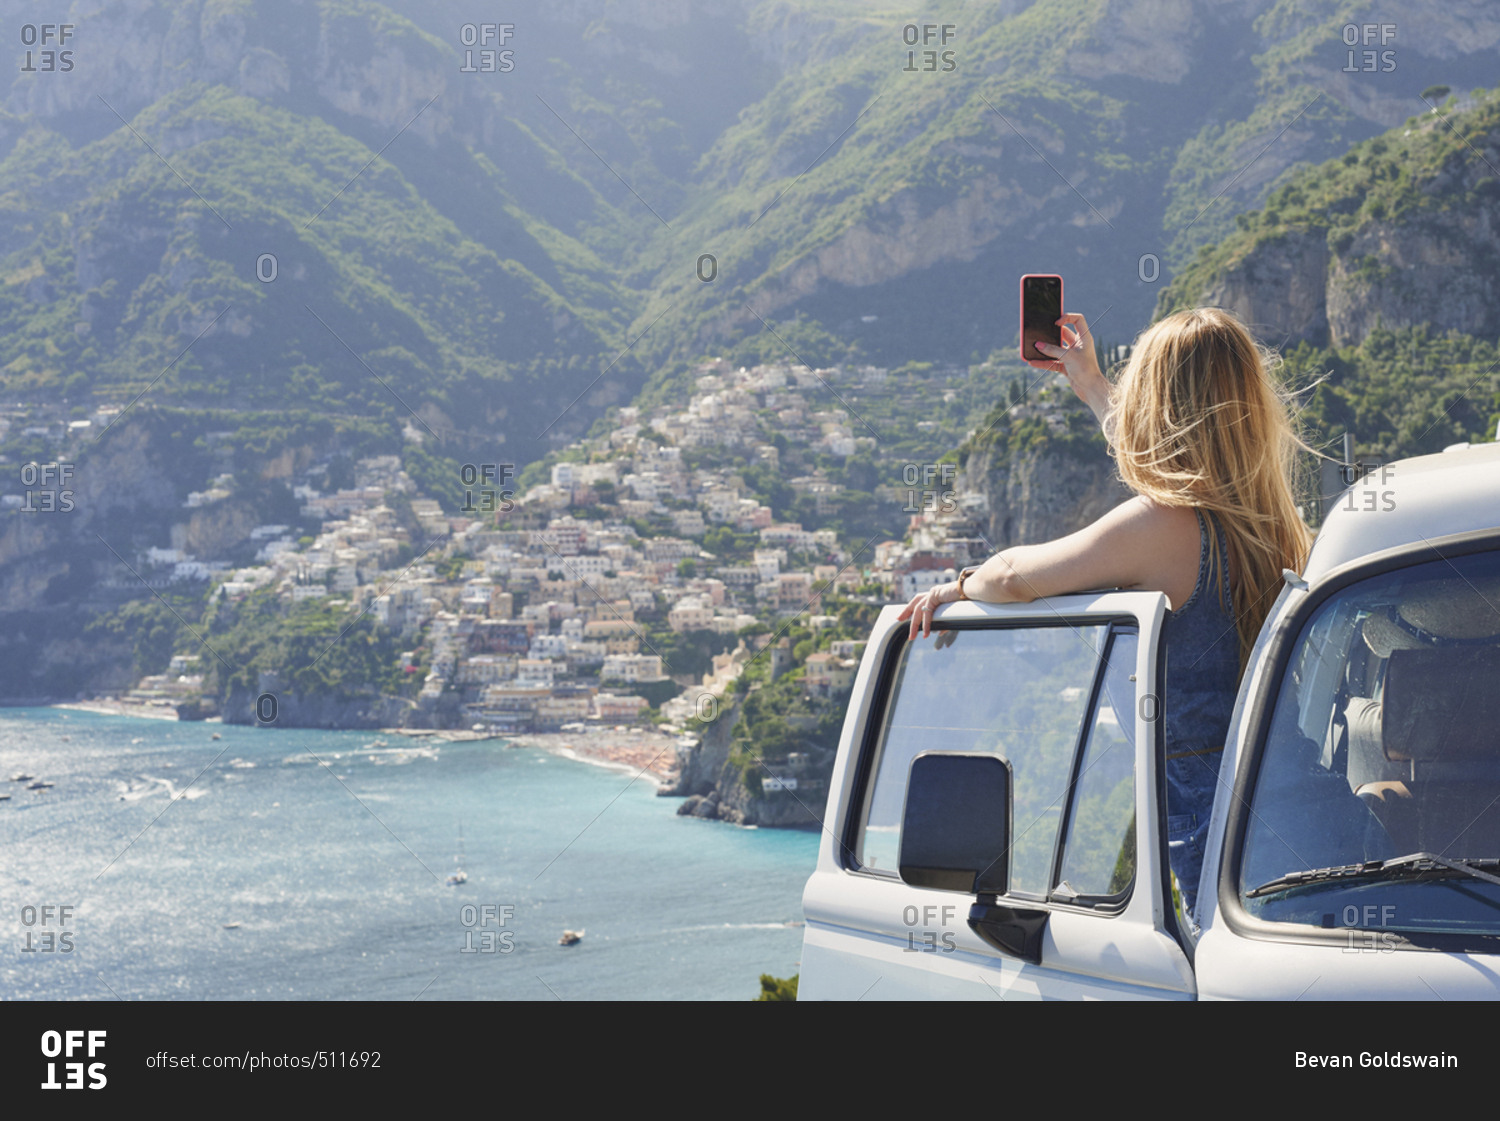 Beautiful girl takes photograph of coast on road trip using smart phone technology for social media while on adventure travel vacation